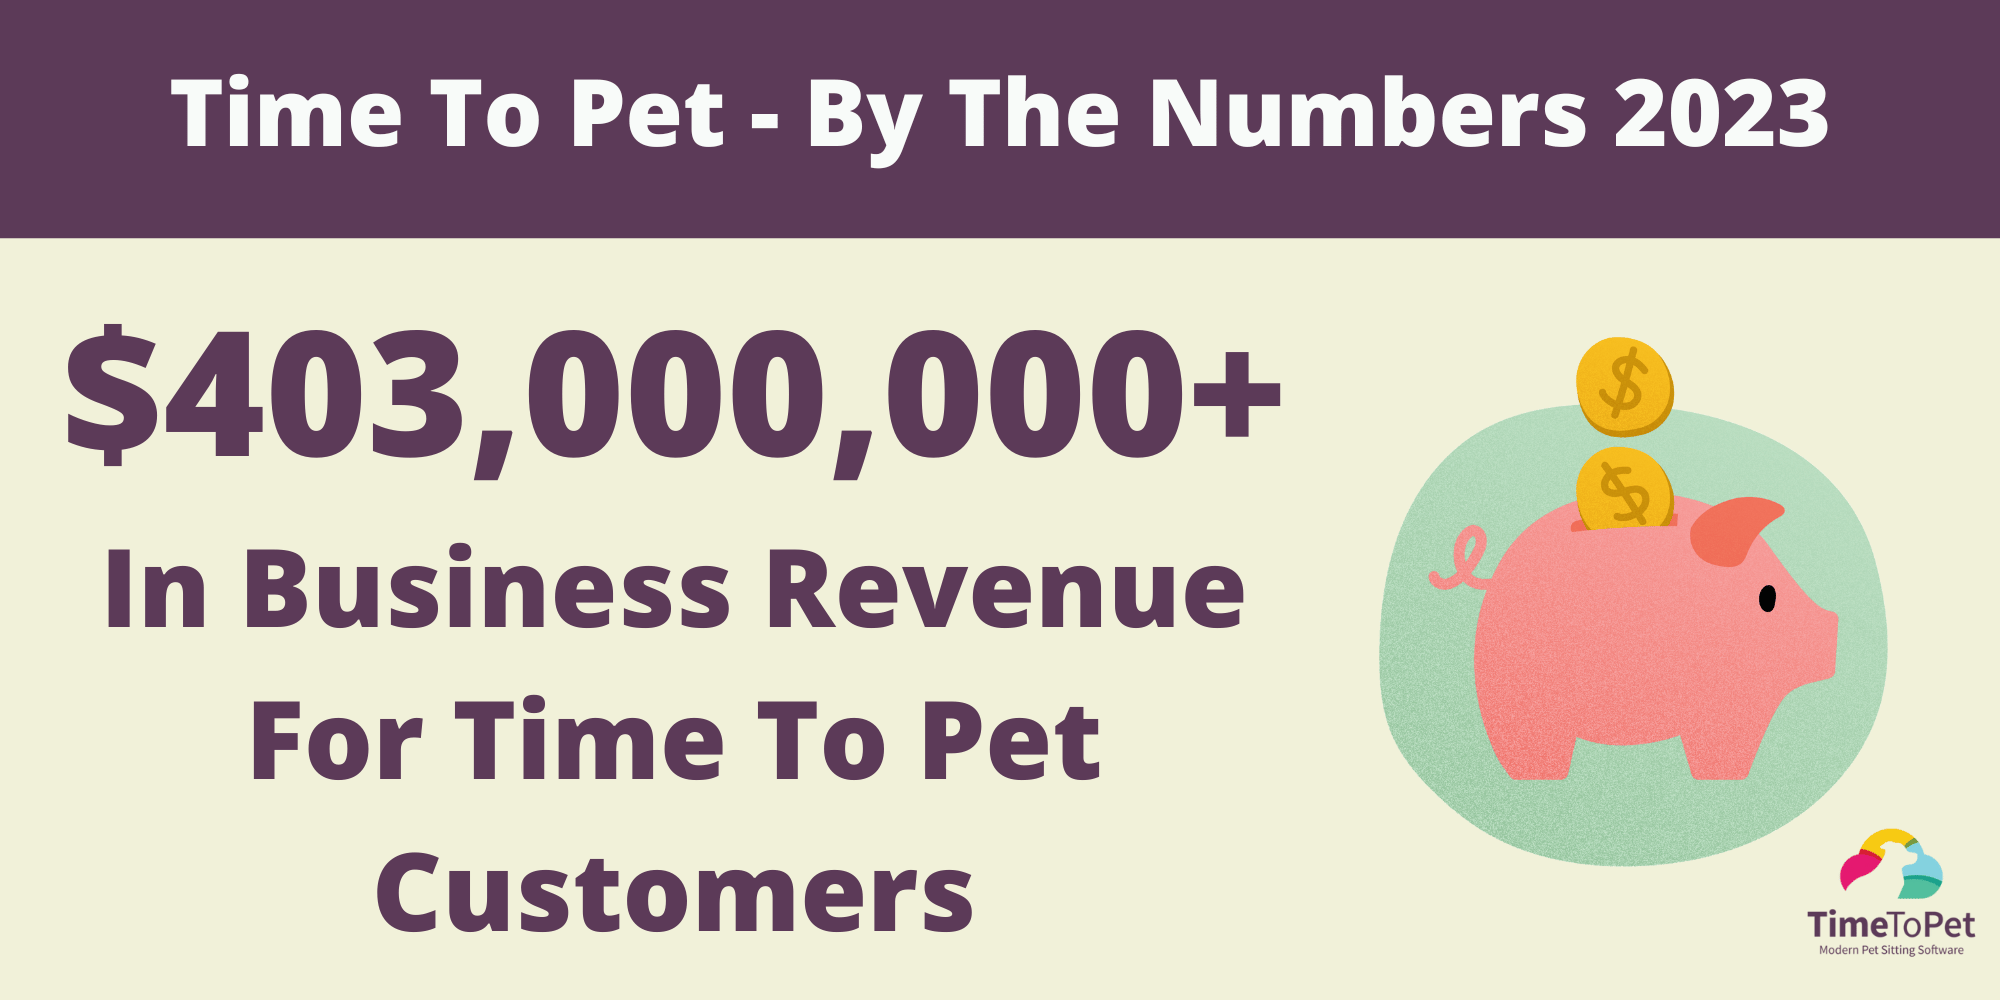 Time%20To%20Pet%20By%20the%20Numbers%202023%20-%20Revenue